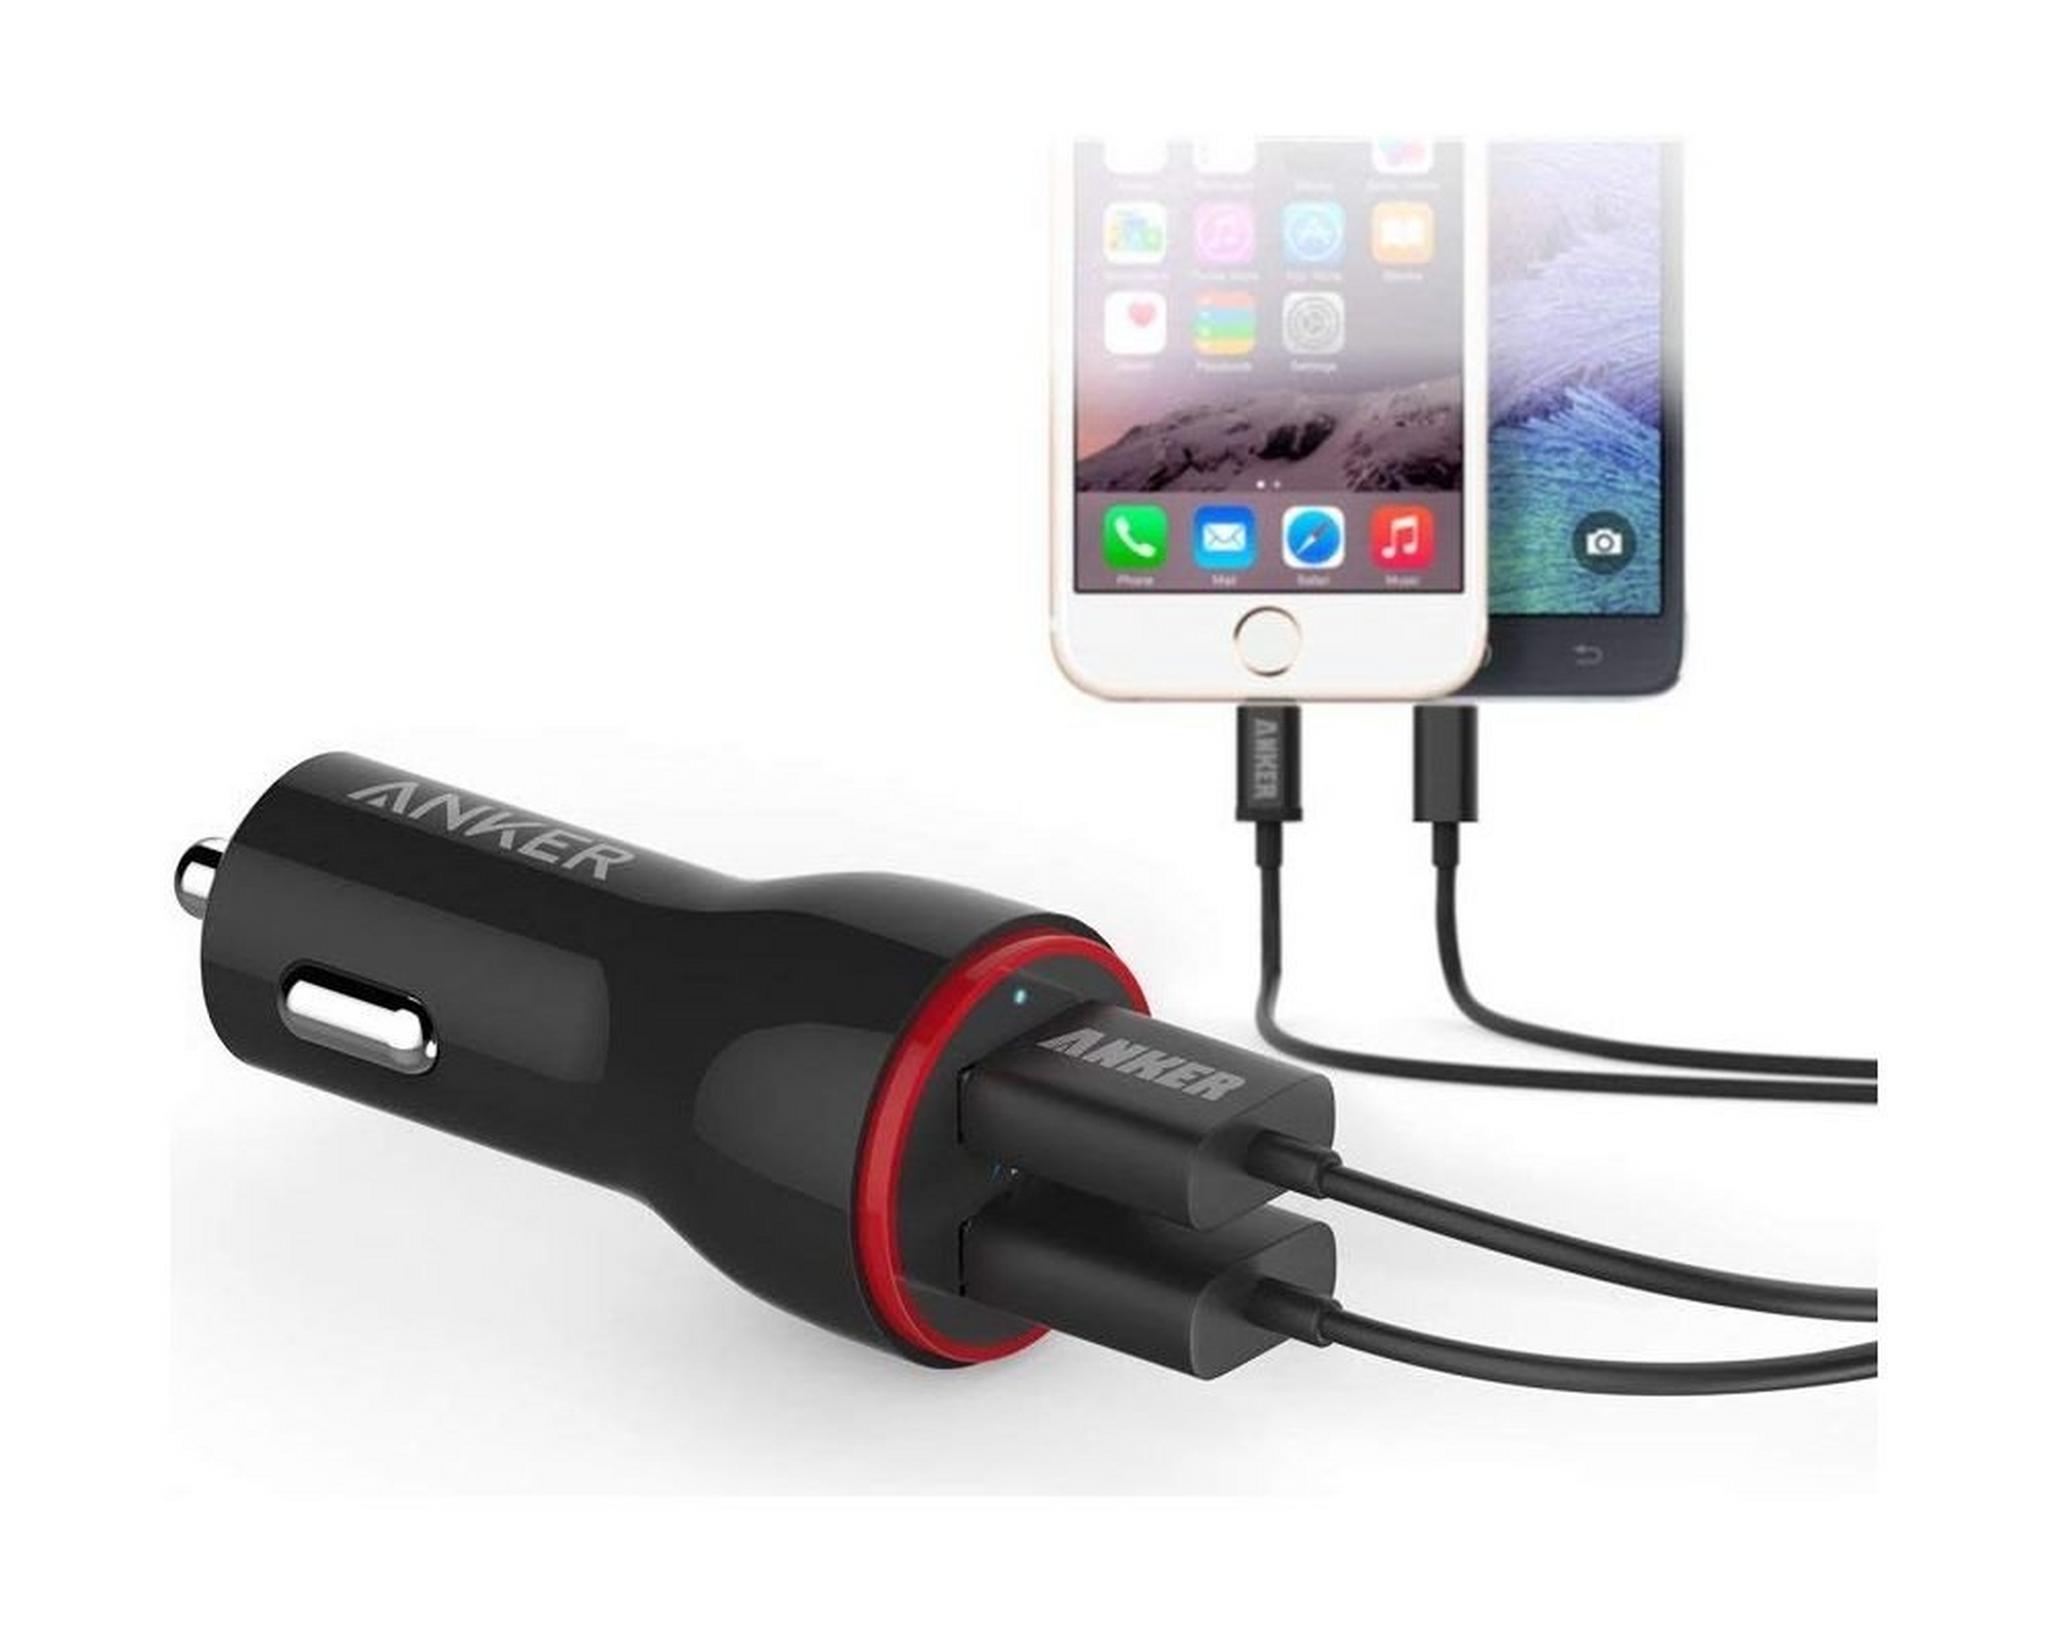 Anker PowerDrive 2 Dual Port Car Charger (A2310H11) - Black